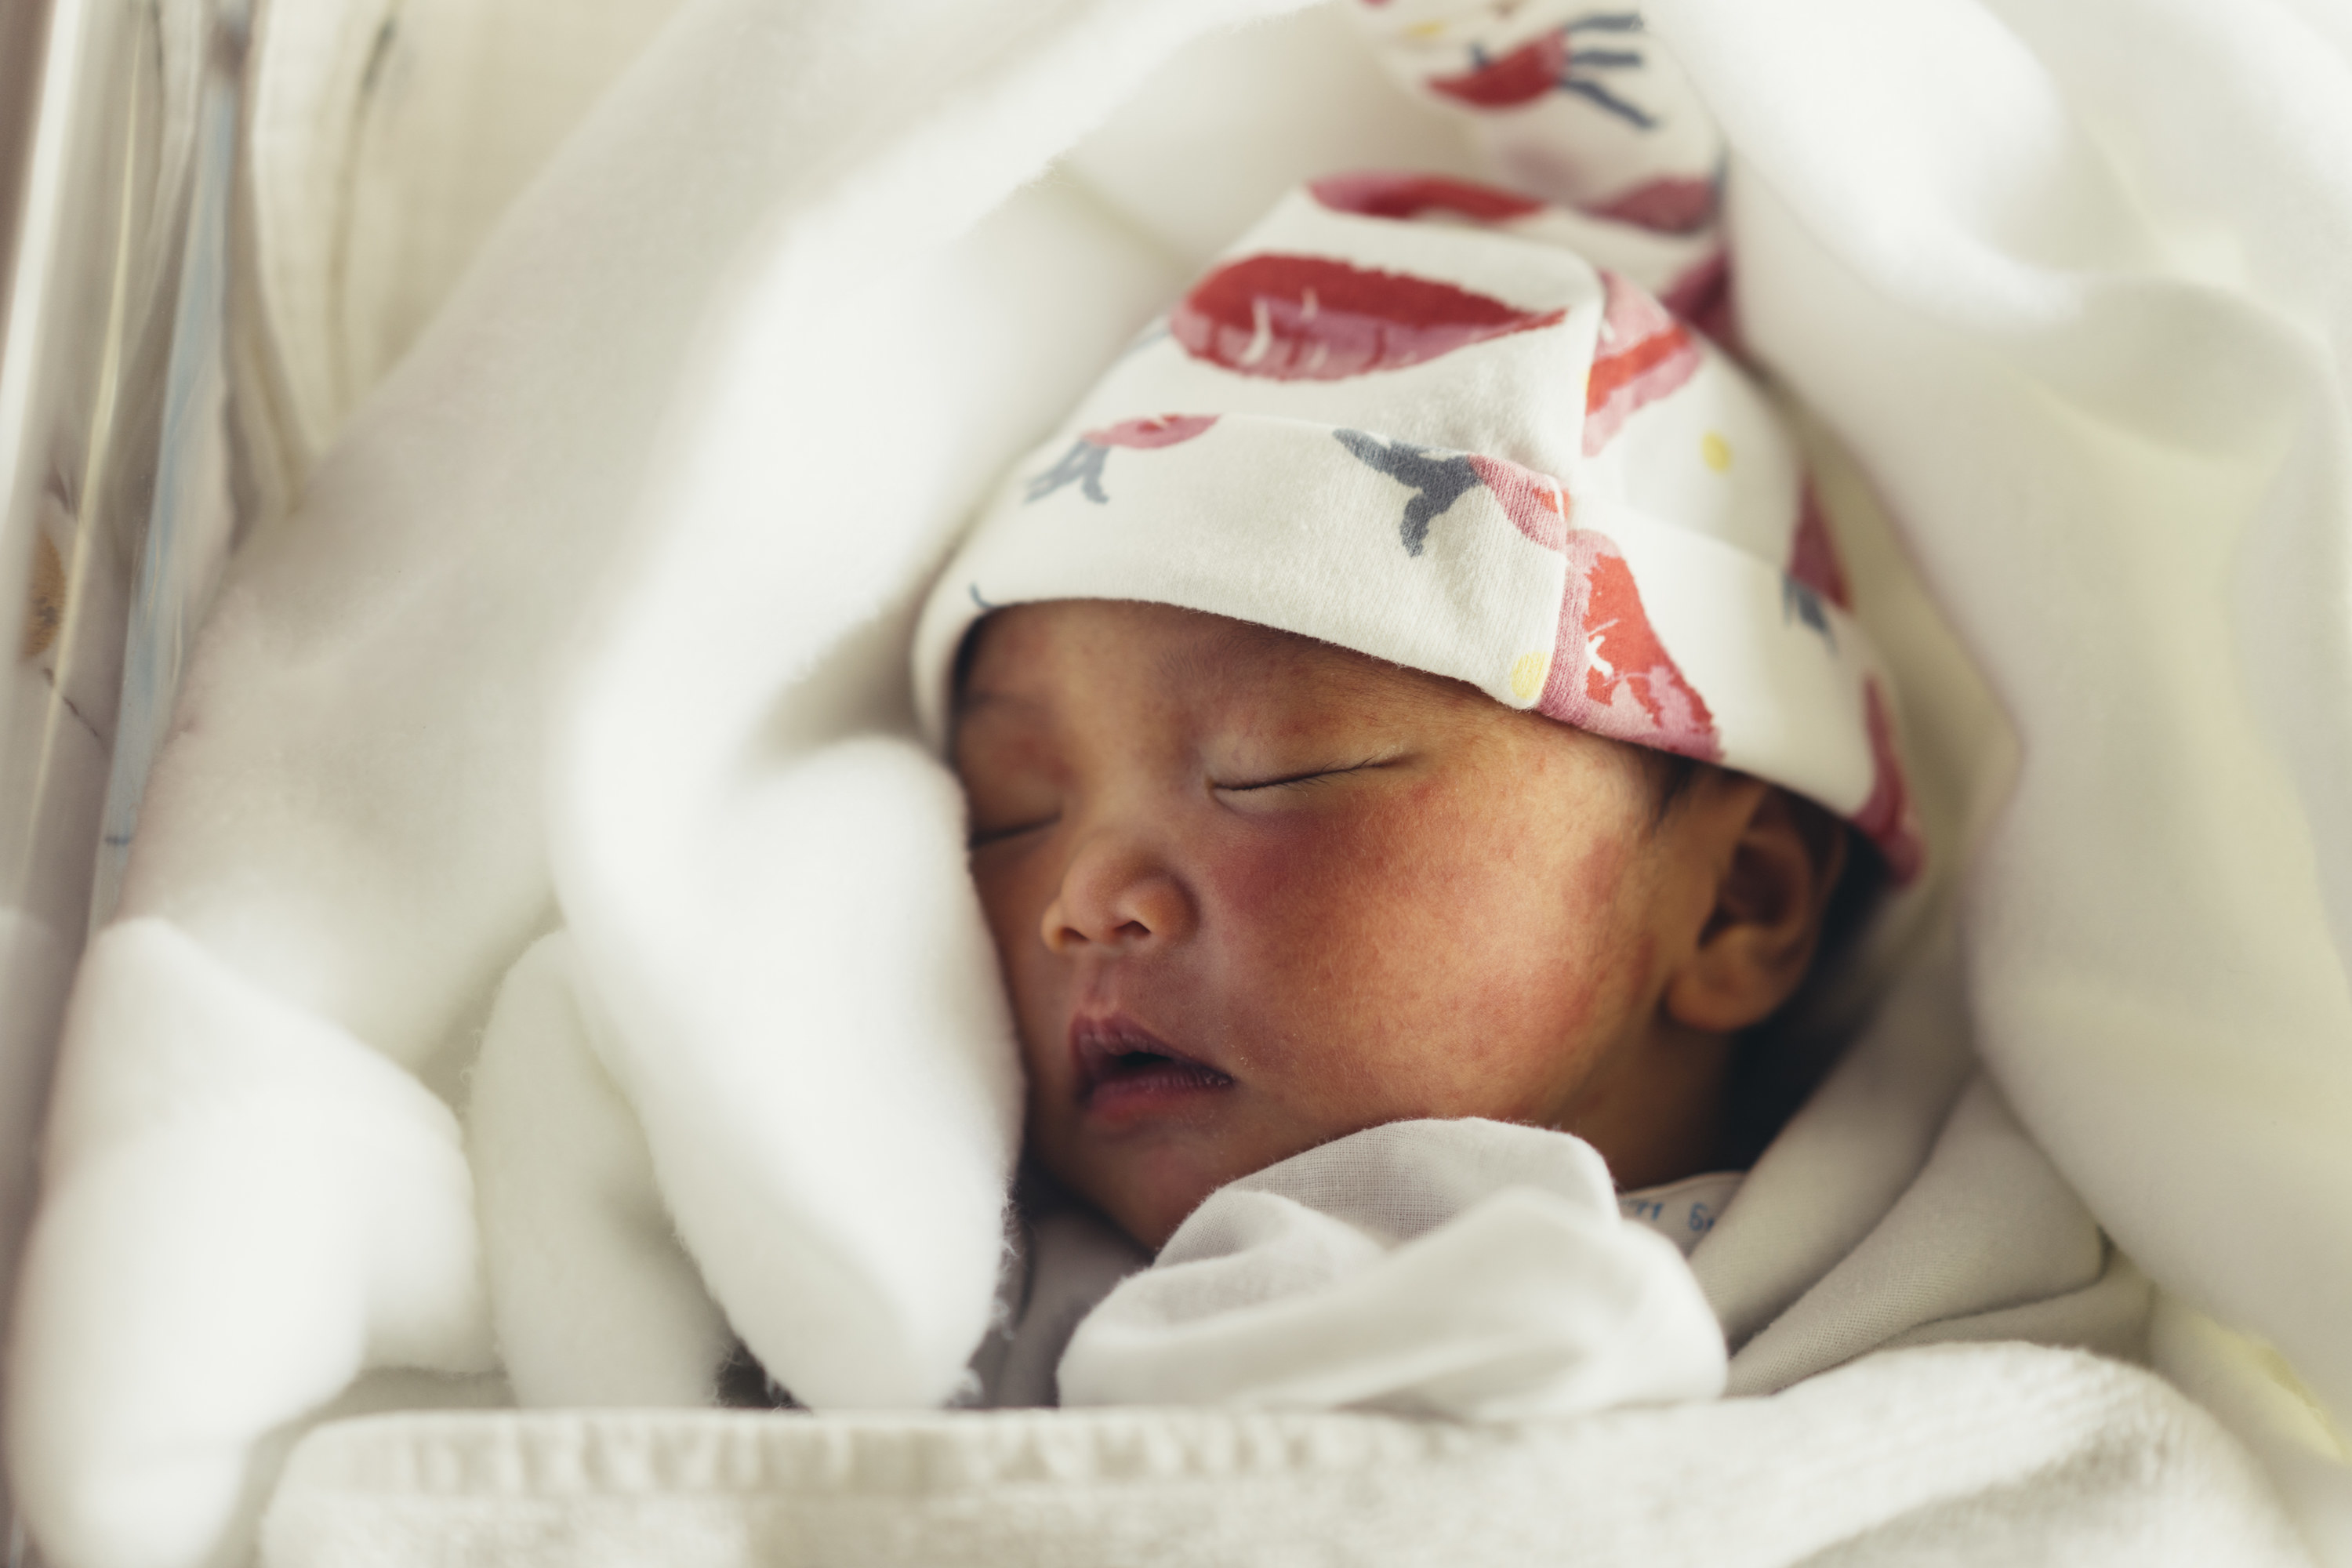 A newborn baby swaddled with a hat on